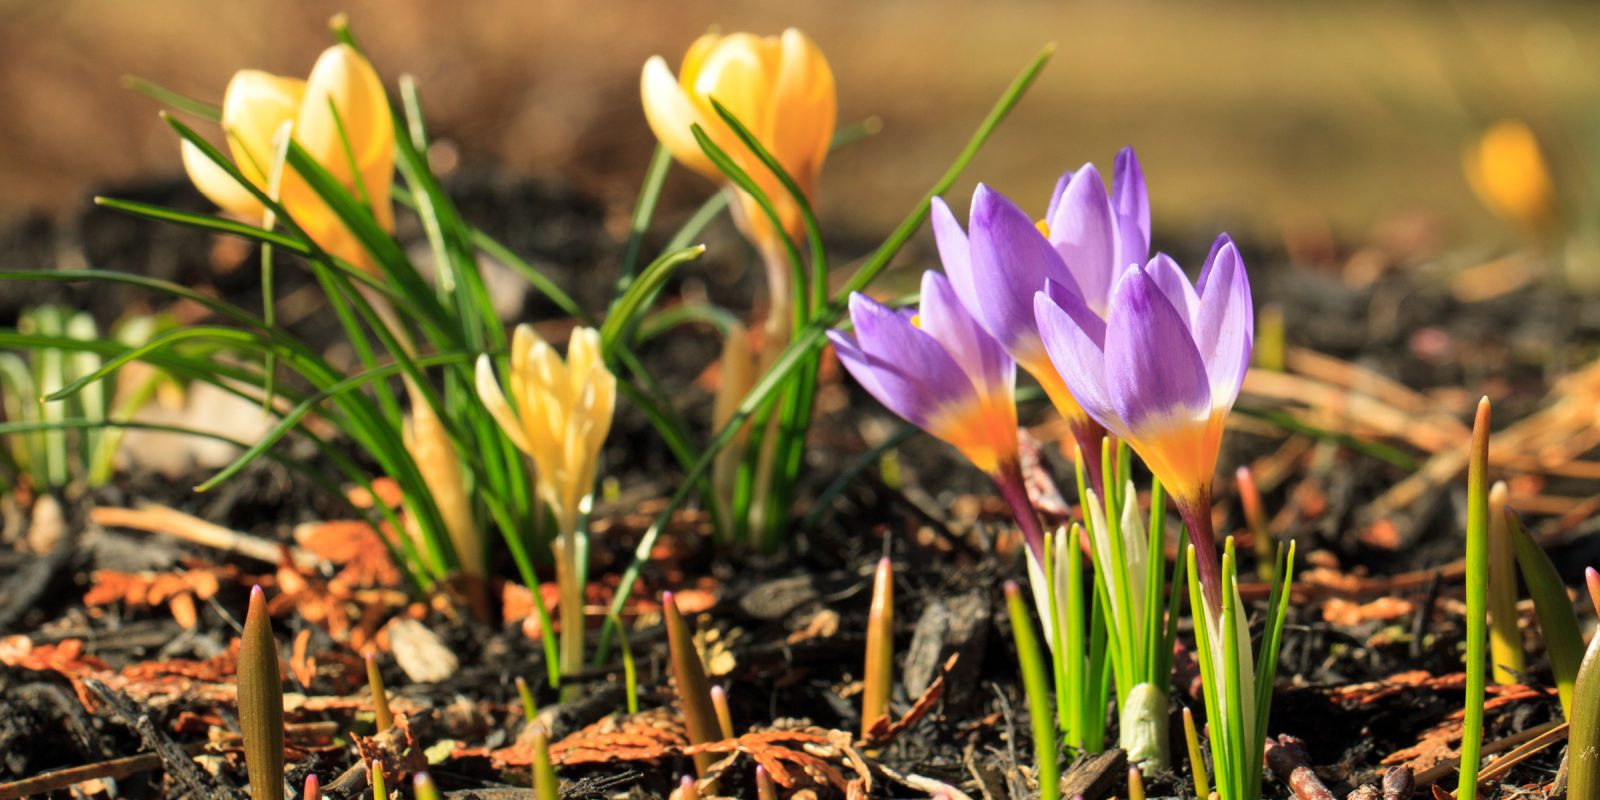 Yellow and purple crocuses blooming in the grass. Photo Credit: Adobe Stock Image